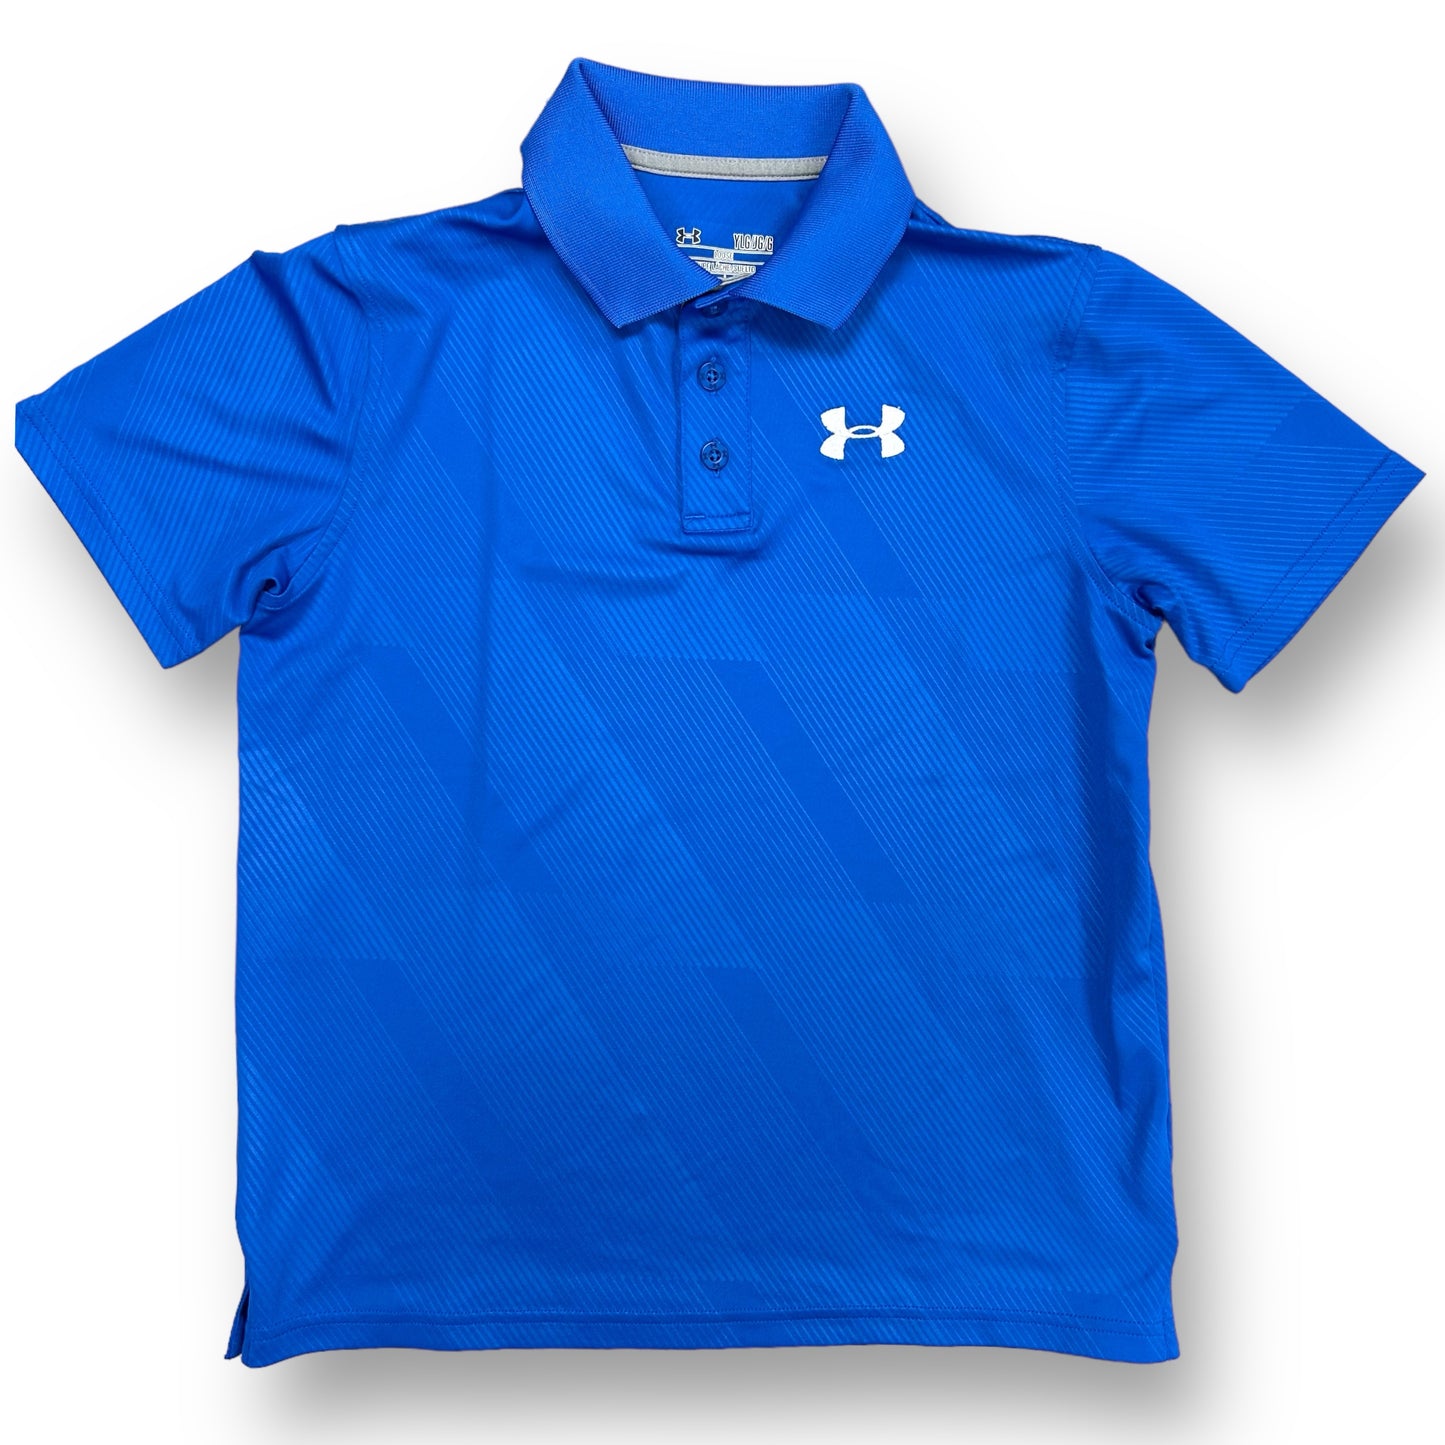 Boys Under Armour Size YLG 12/14 Royal Blue Short Sleeve Loose Fit Polo Shirt